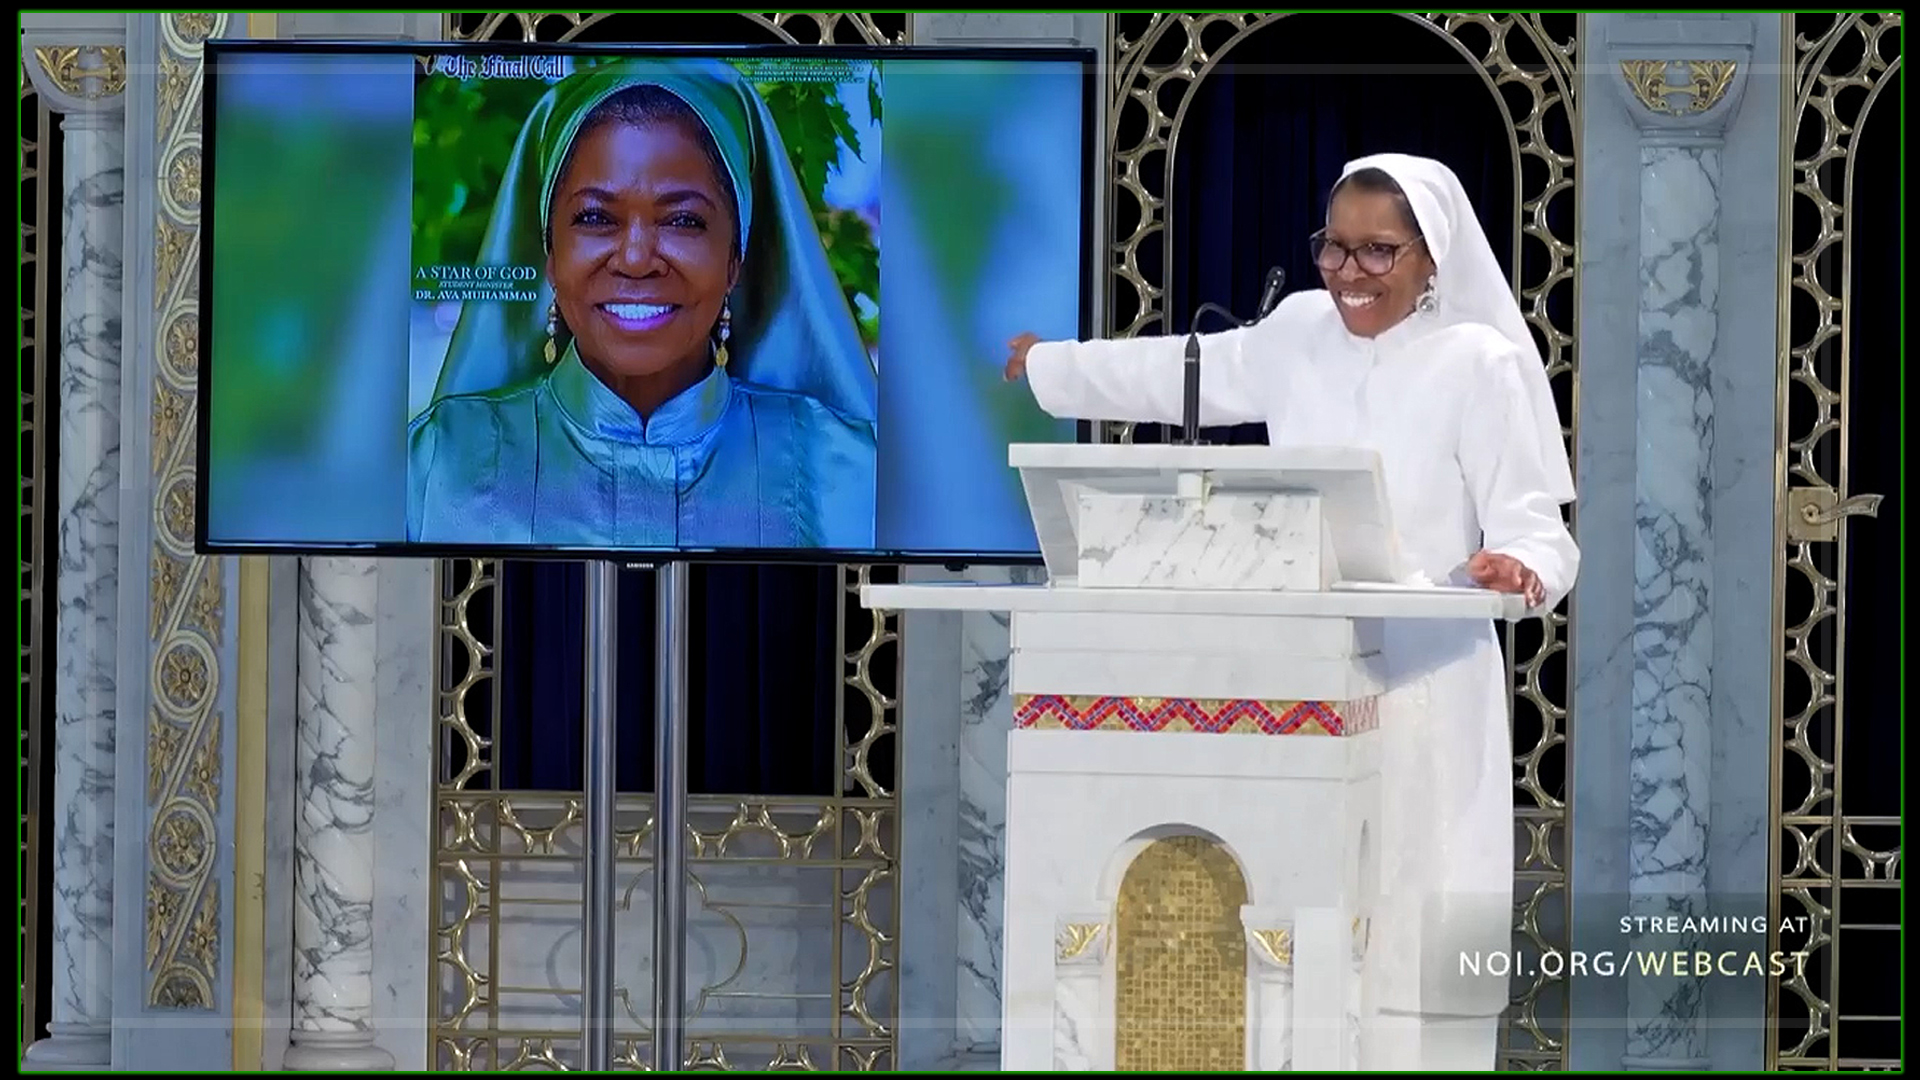 A Star of God: A Special Tribute To Student Minister Ava Muhammad